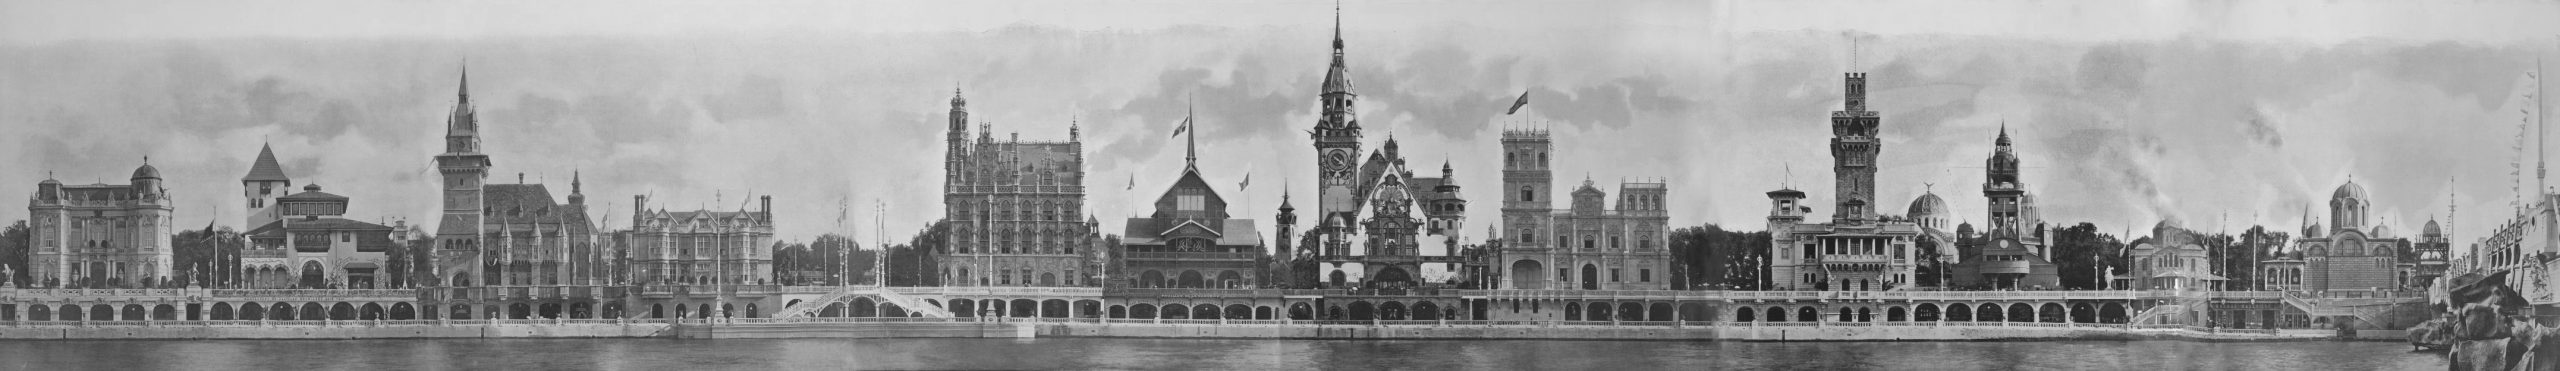 Panorama_of_foreign_pavilions_at_the_1900_Paris_World_Fair